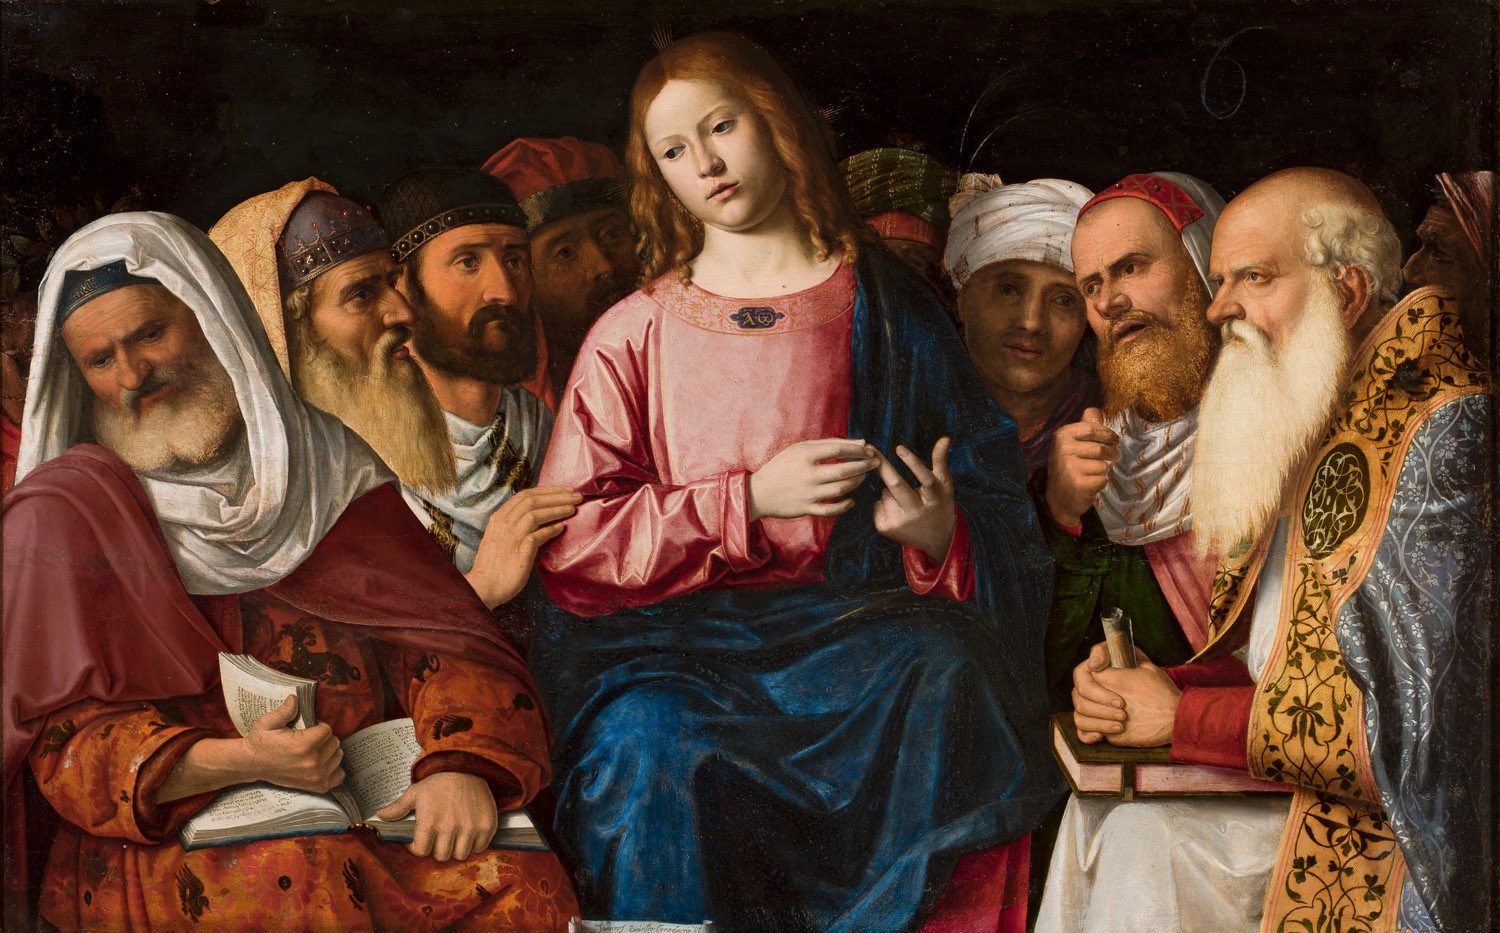 Adoption of the painting "Christ among the doctors" by Cima da Conegliano, 1504